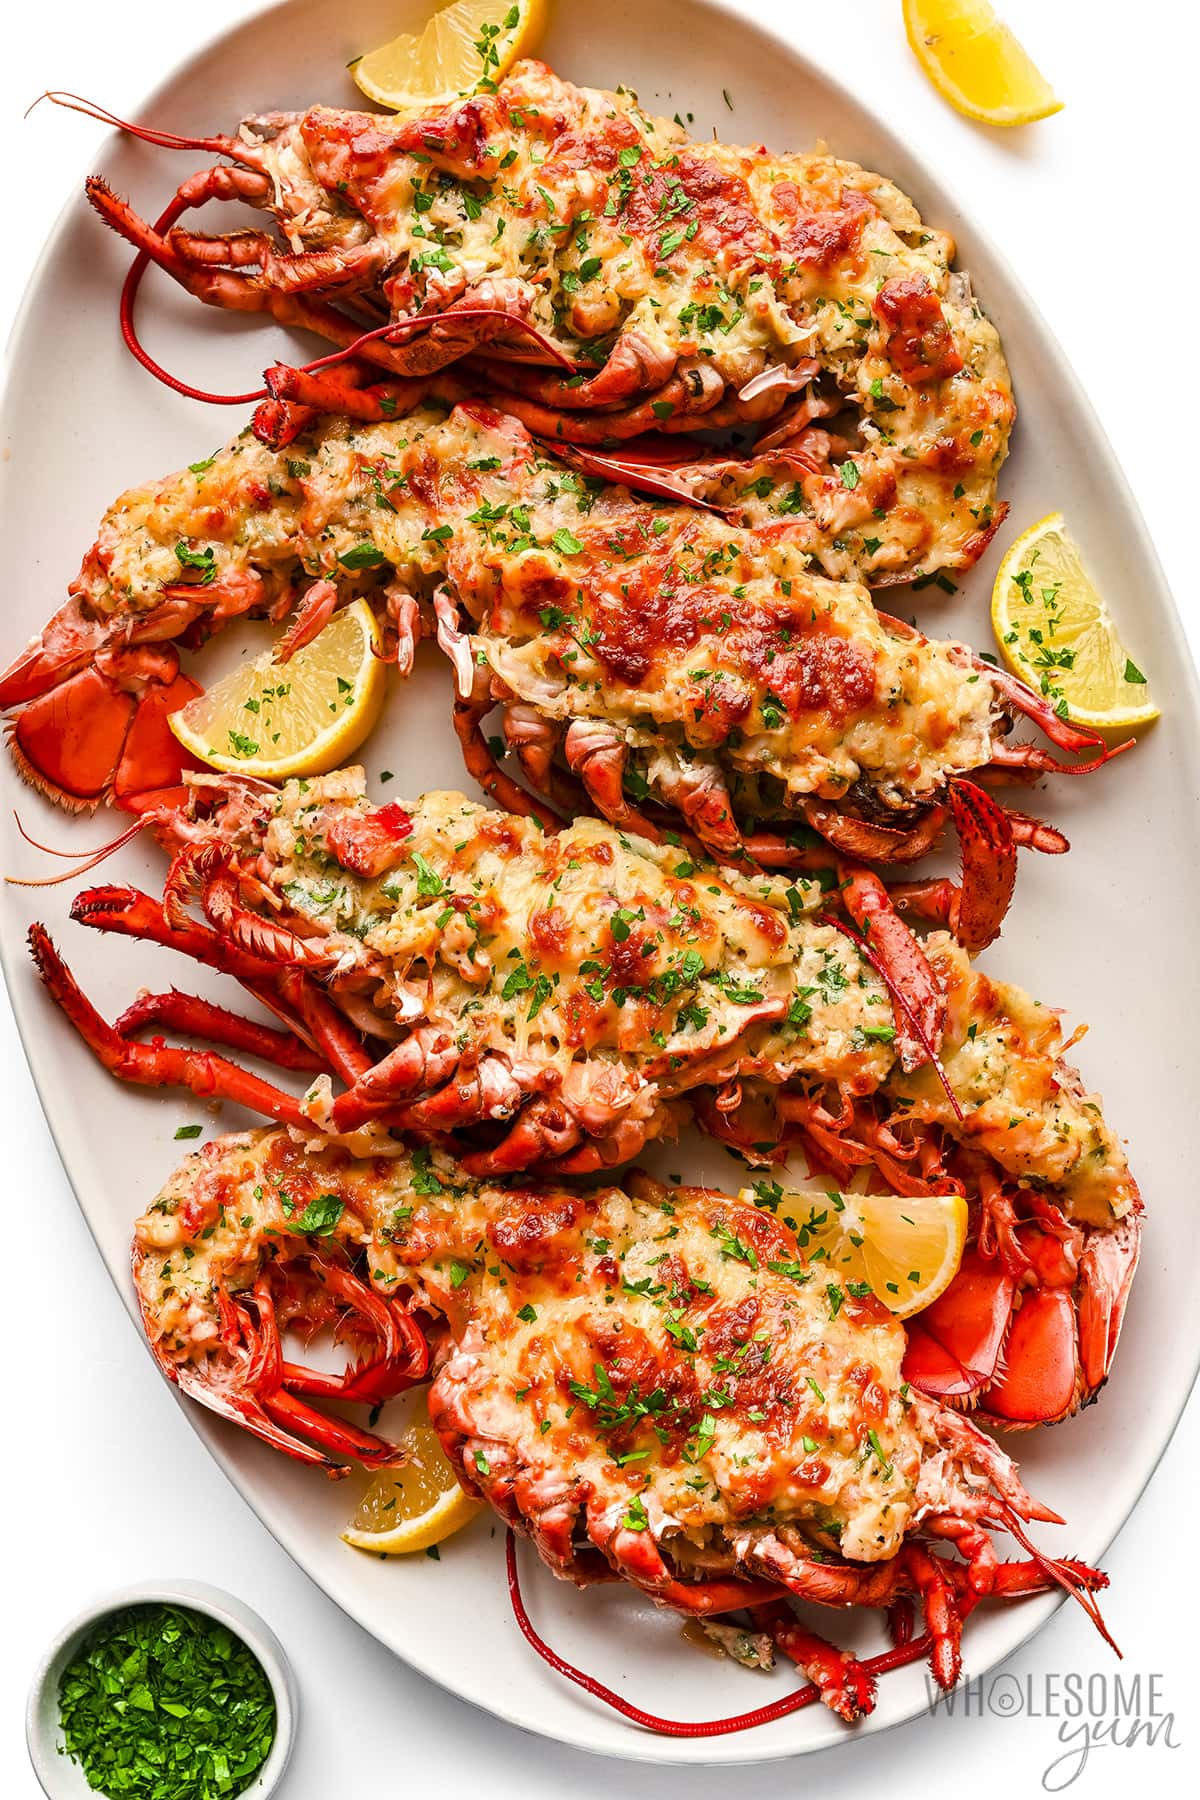 Lobster Thermidor with lemon wedges.